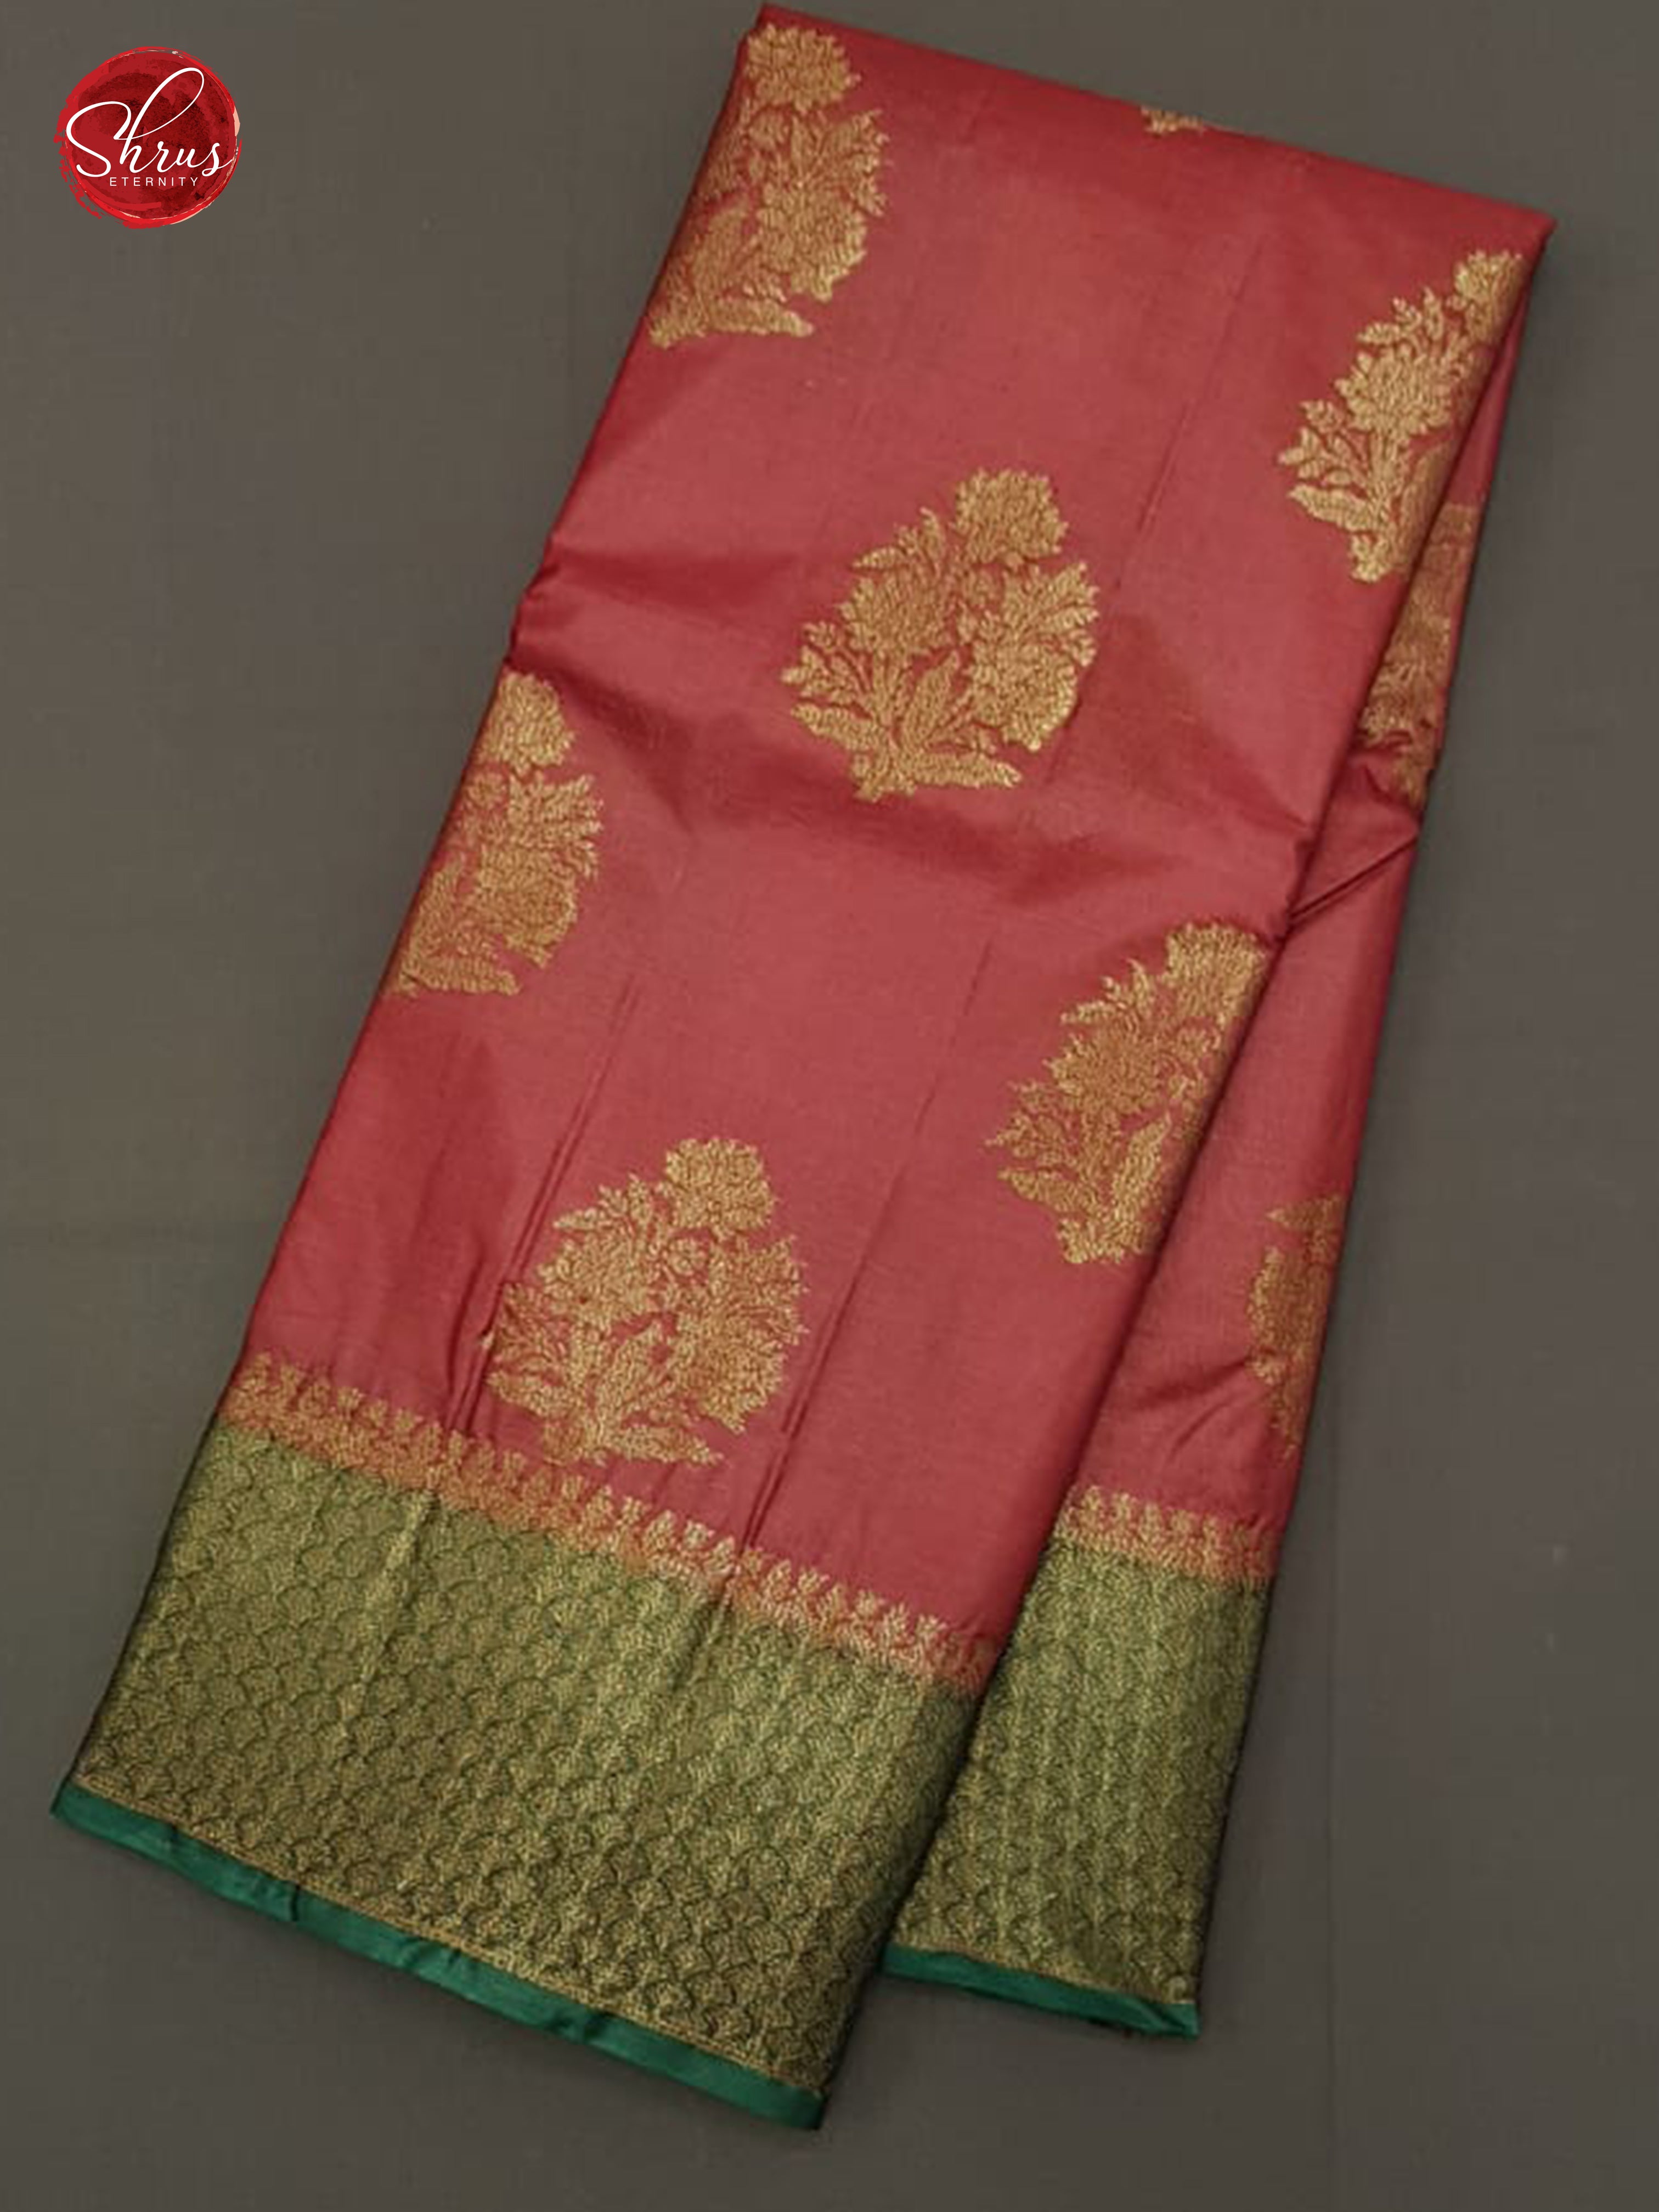 Red & Green- Tussar with zari woven floral motifs on the body & Zari Border - Shop on ShrusEternity.com